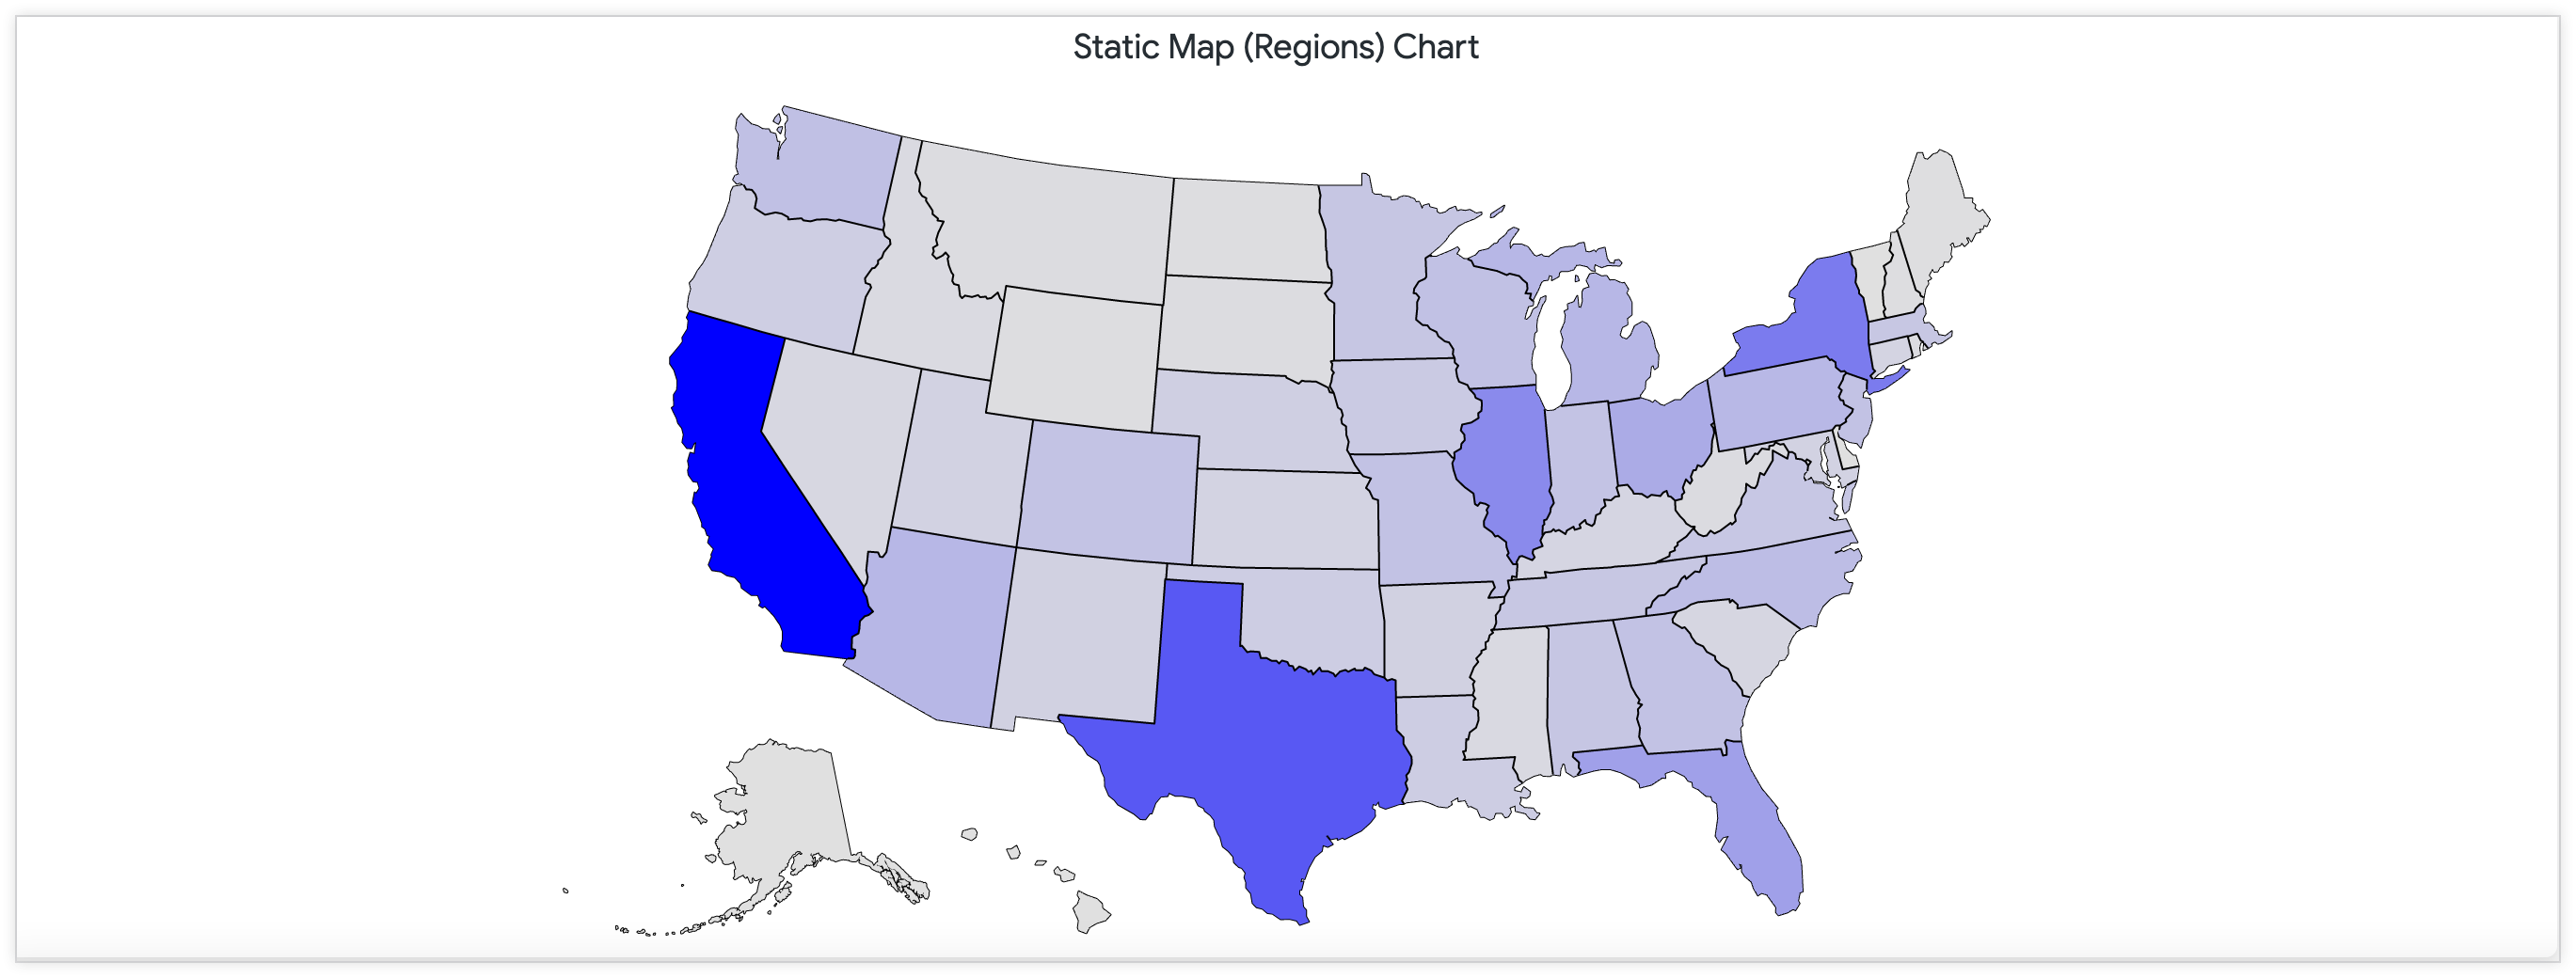 Static map showing number of store locations in the United States through a continuous color palette.